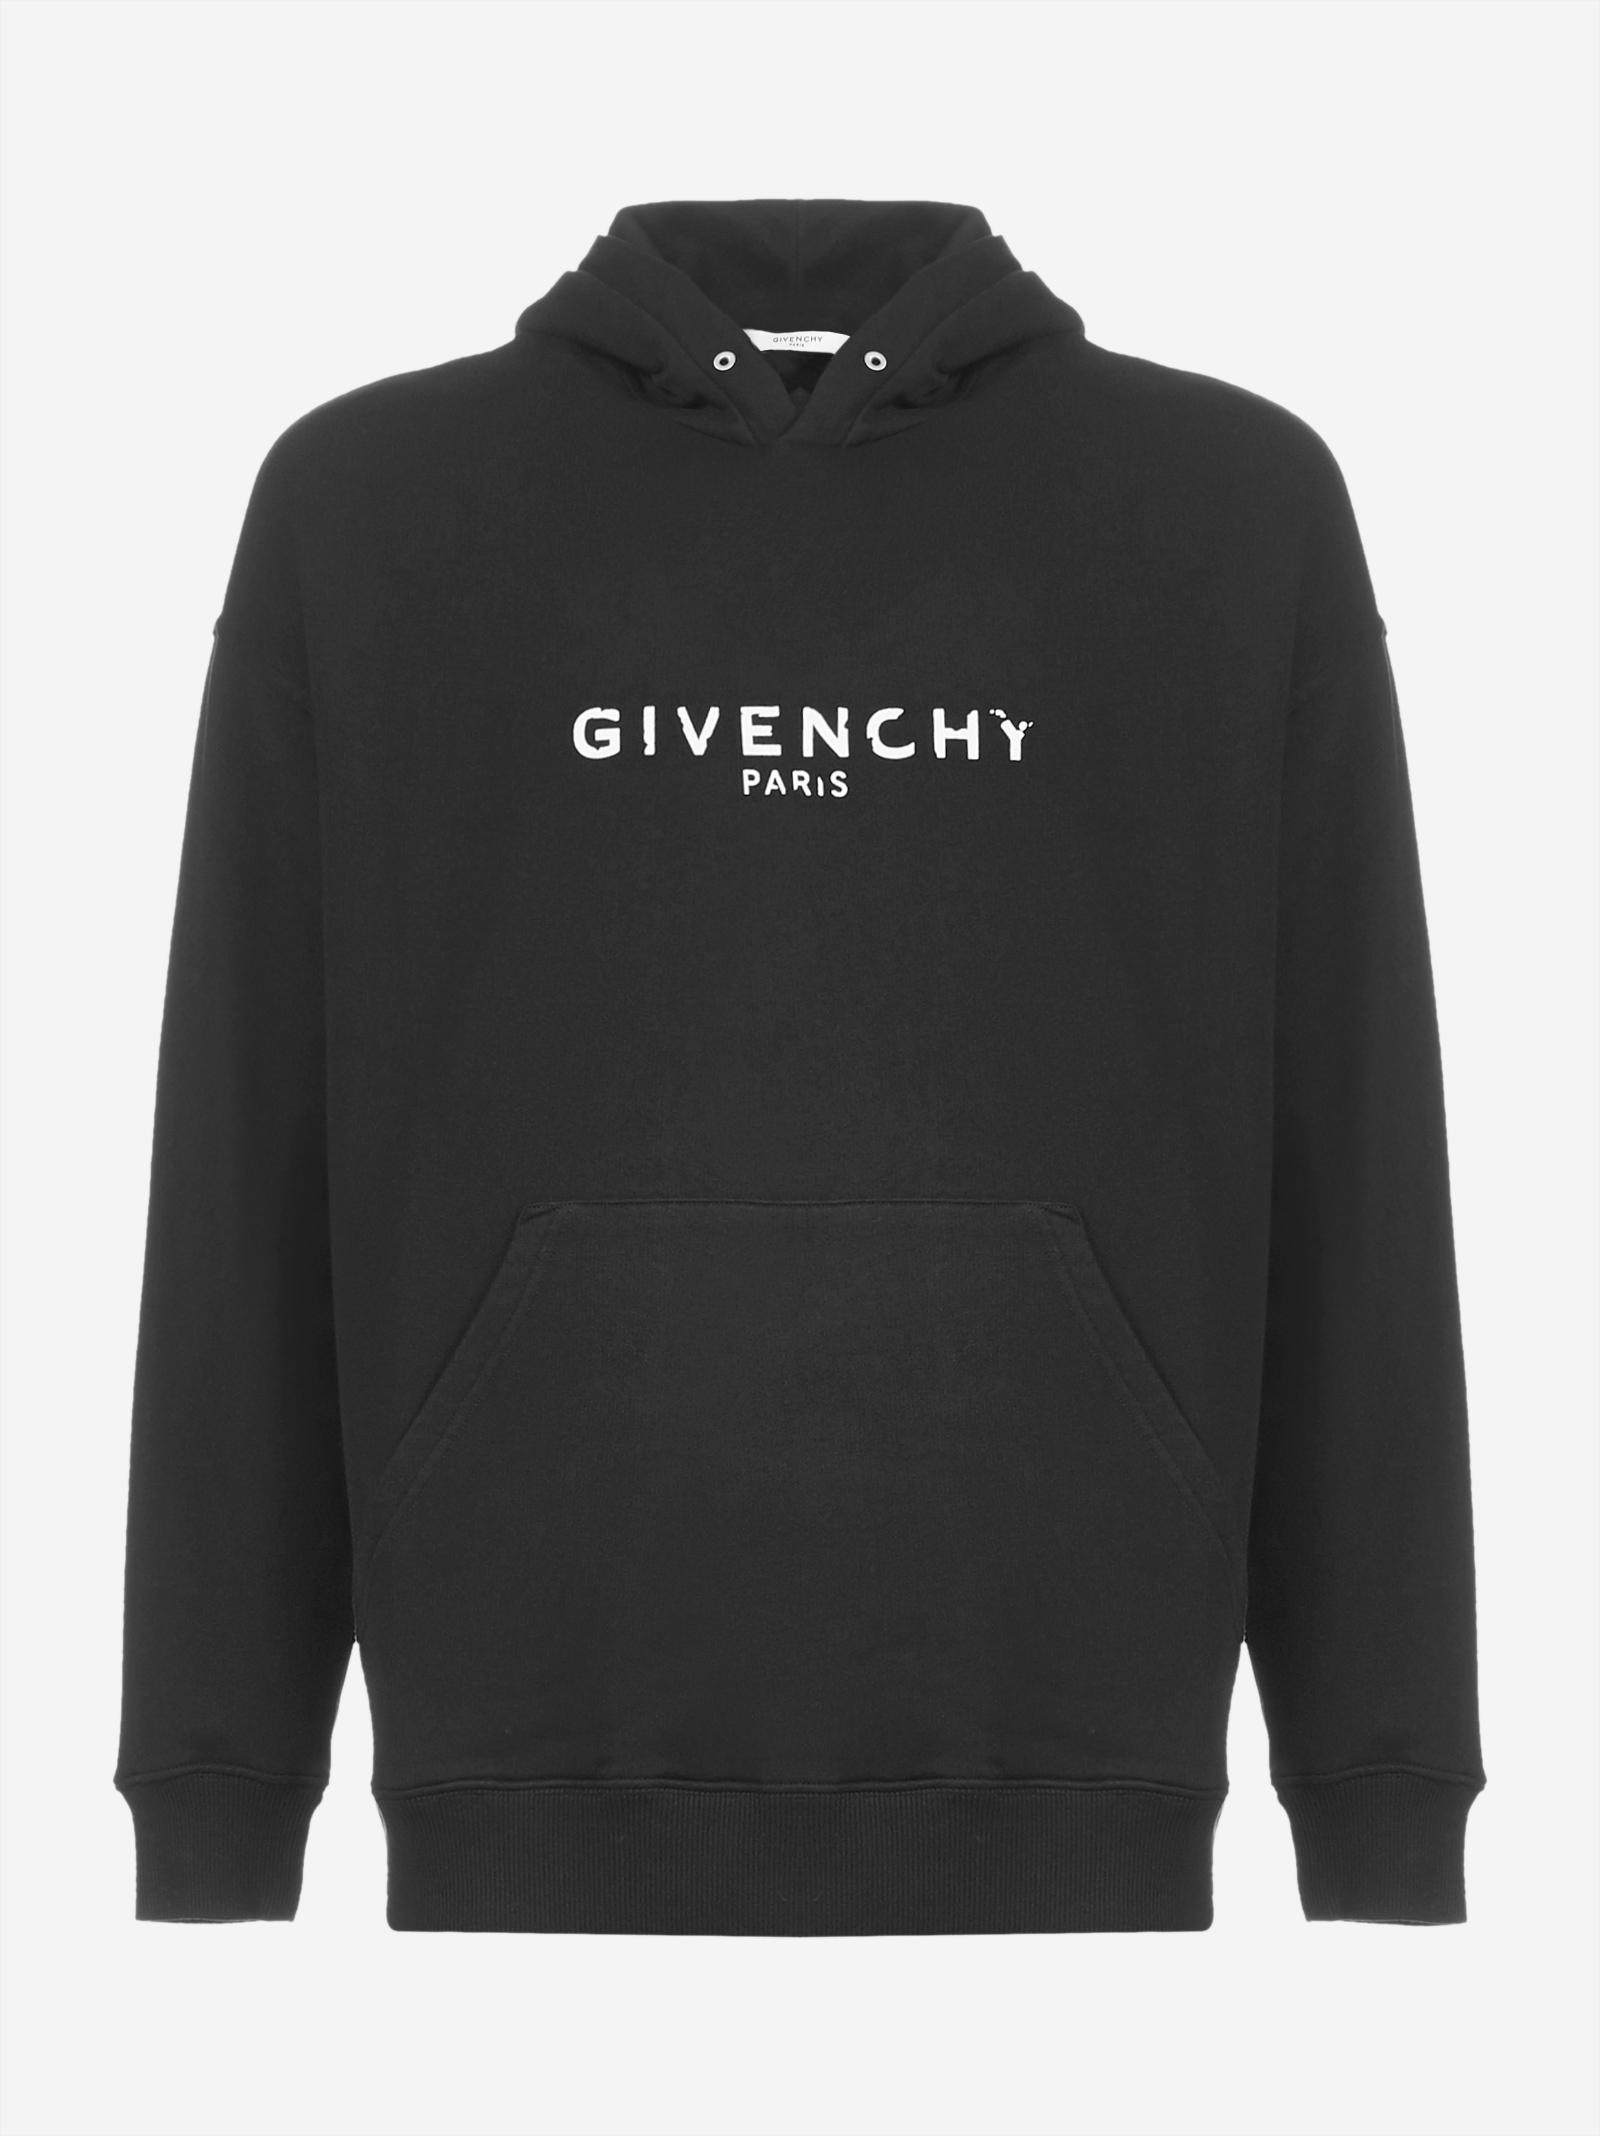 Givenchy Cotton Hoodie With Logo in Black for Men - Lyst